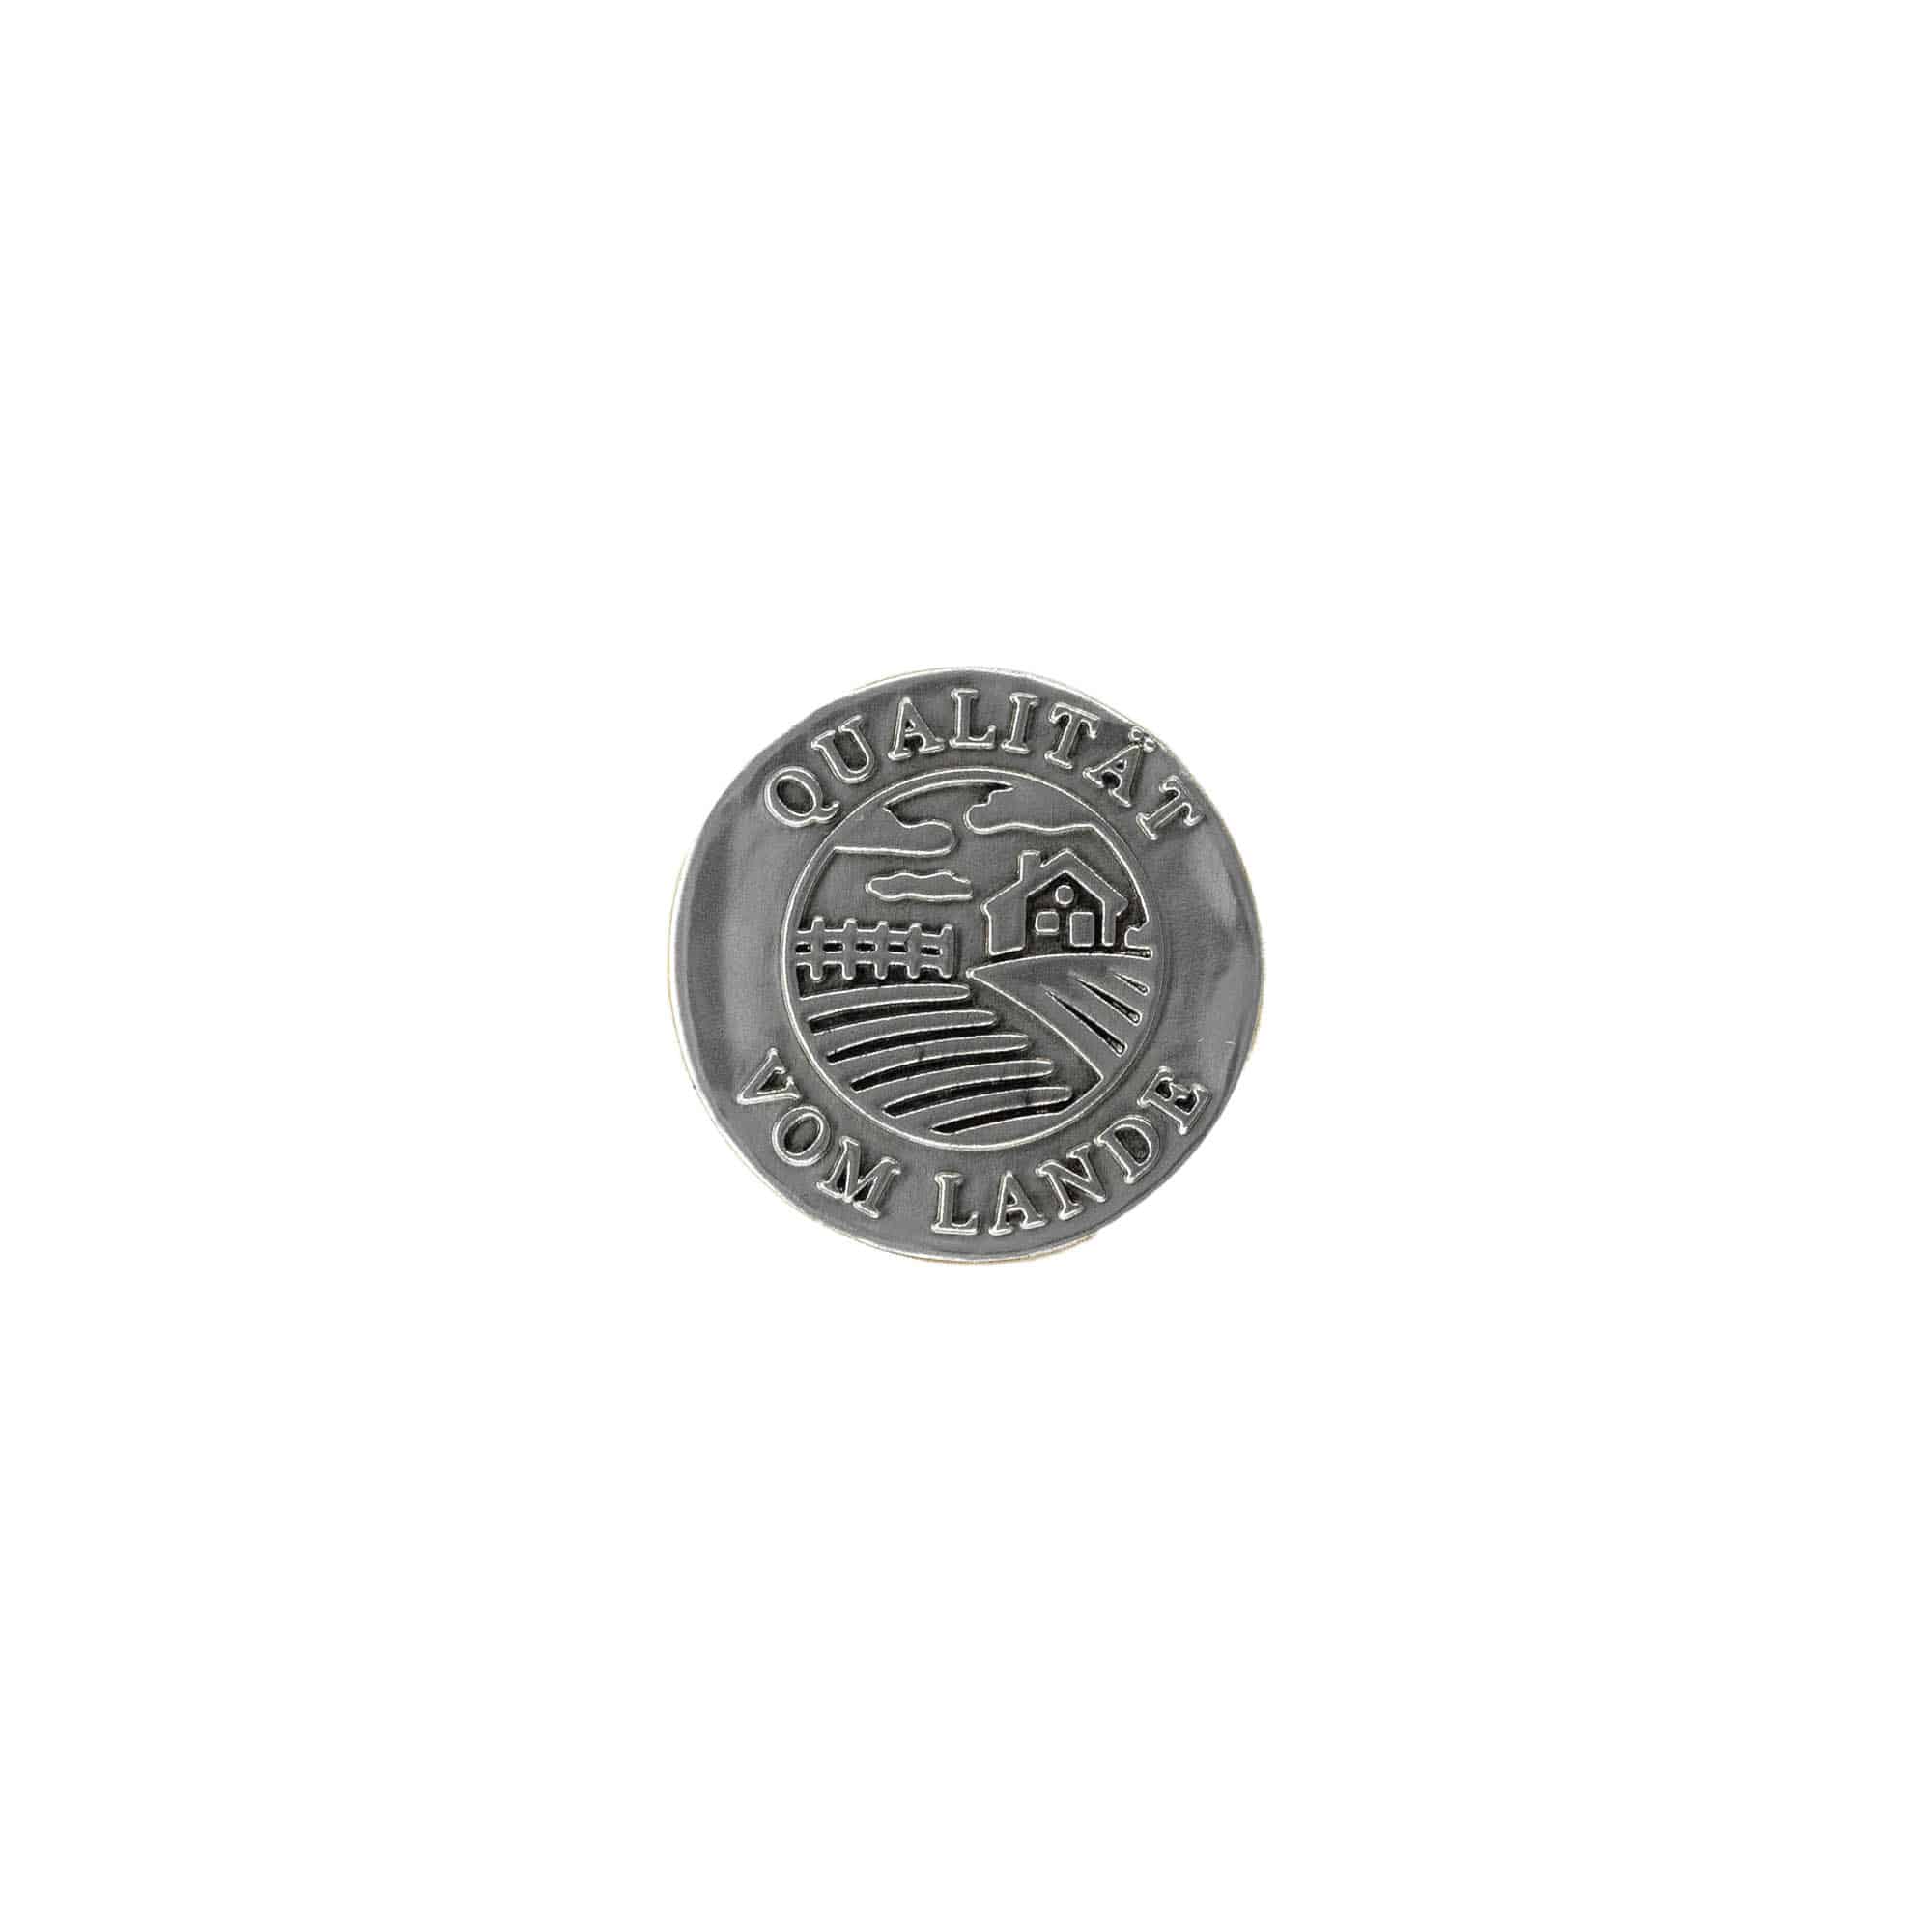 Pewter tag 'Quality Produce', round, metal, silver